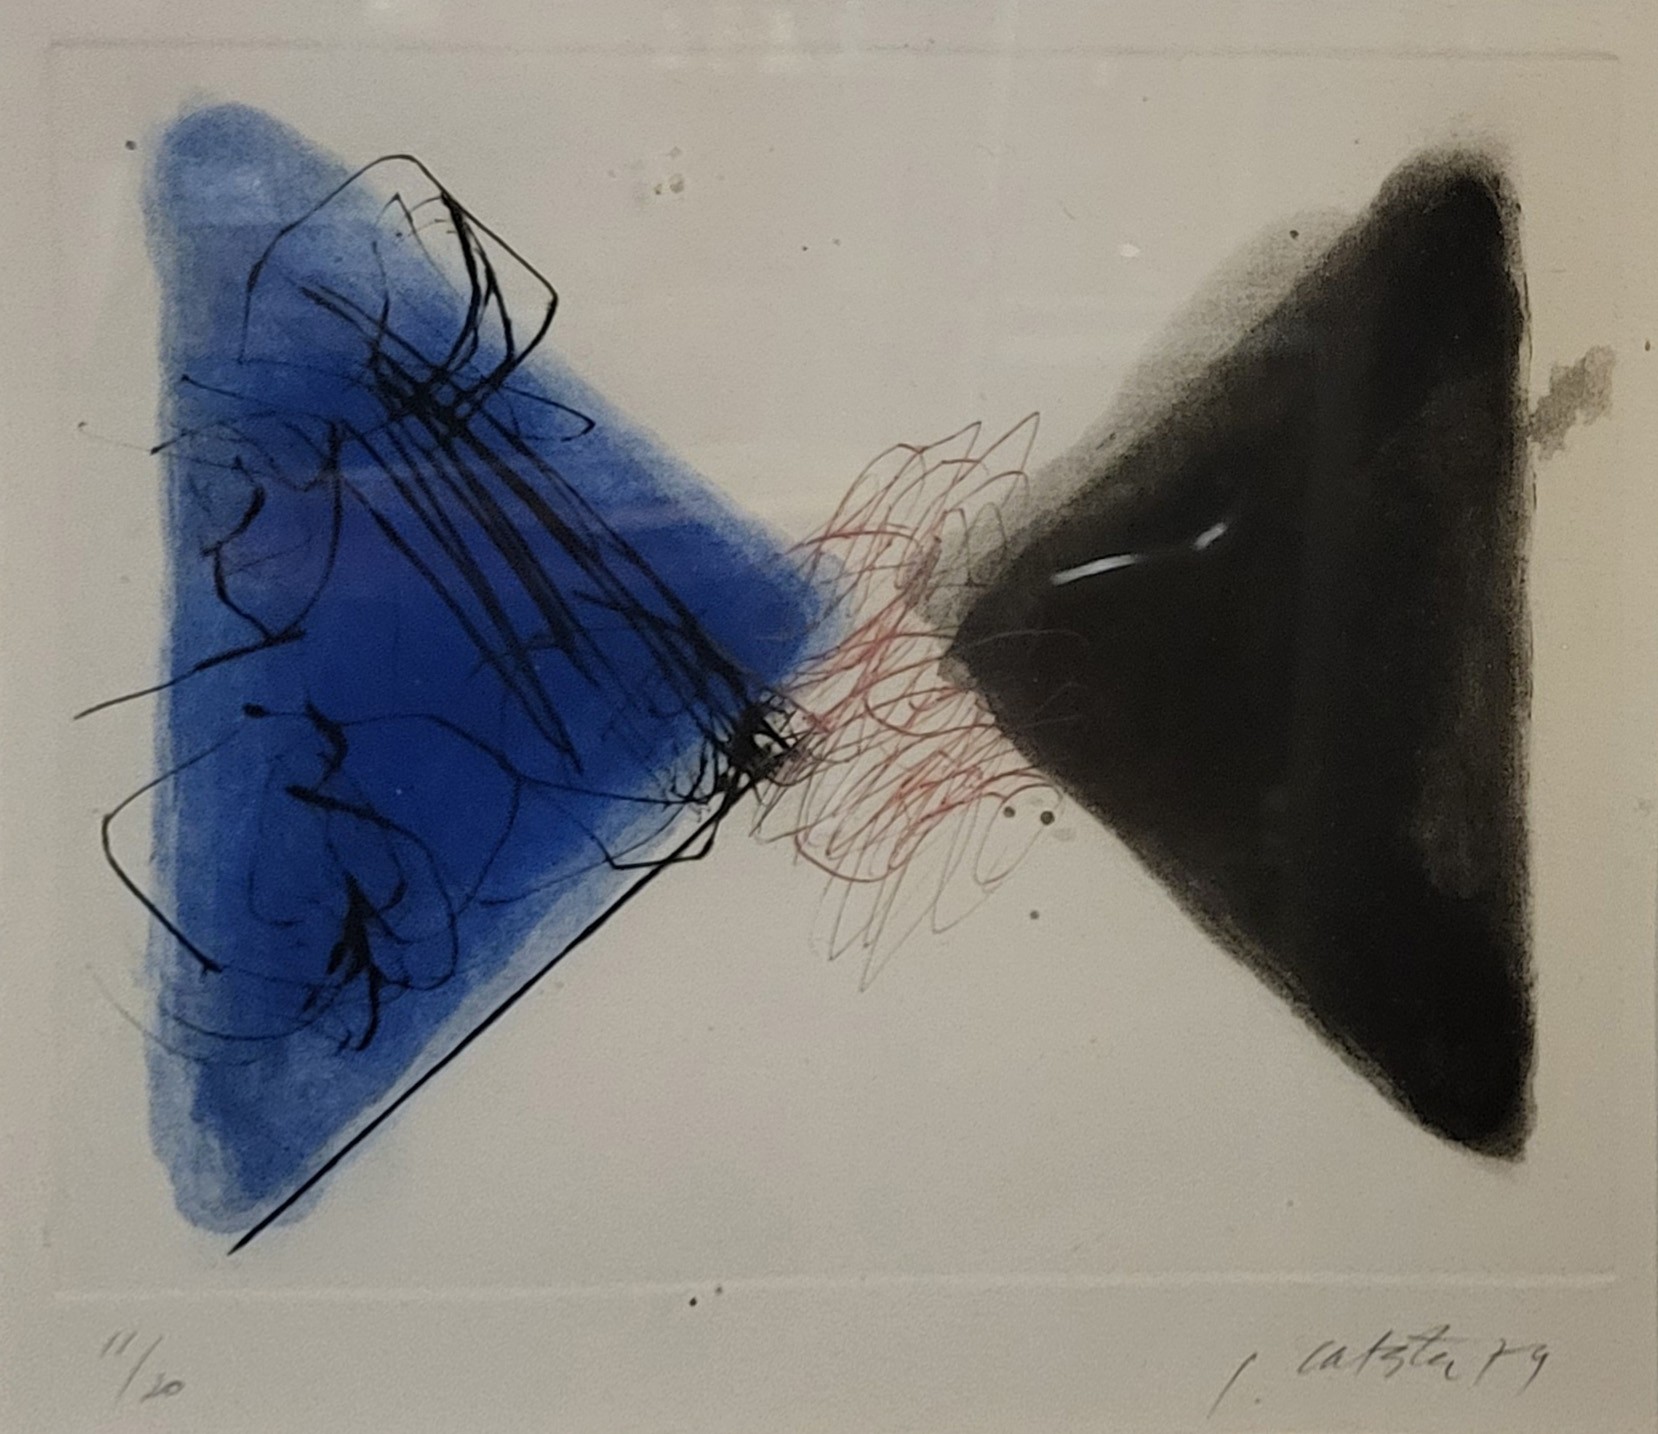 GER LASTER, DUTCH, 1920 - 2012, A LIMITED EDITION (11/20) ABSTRACT LITHOGRAPHIC GEOMETRIC STUDY WITH